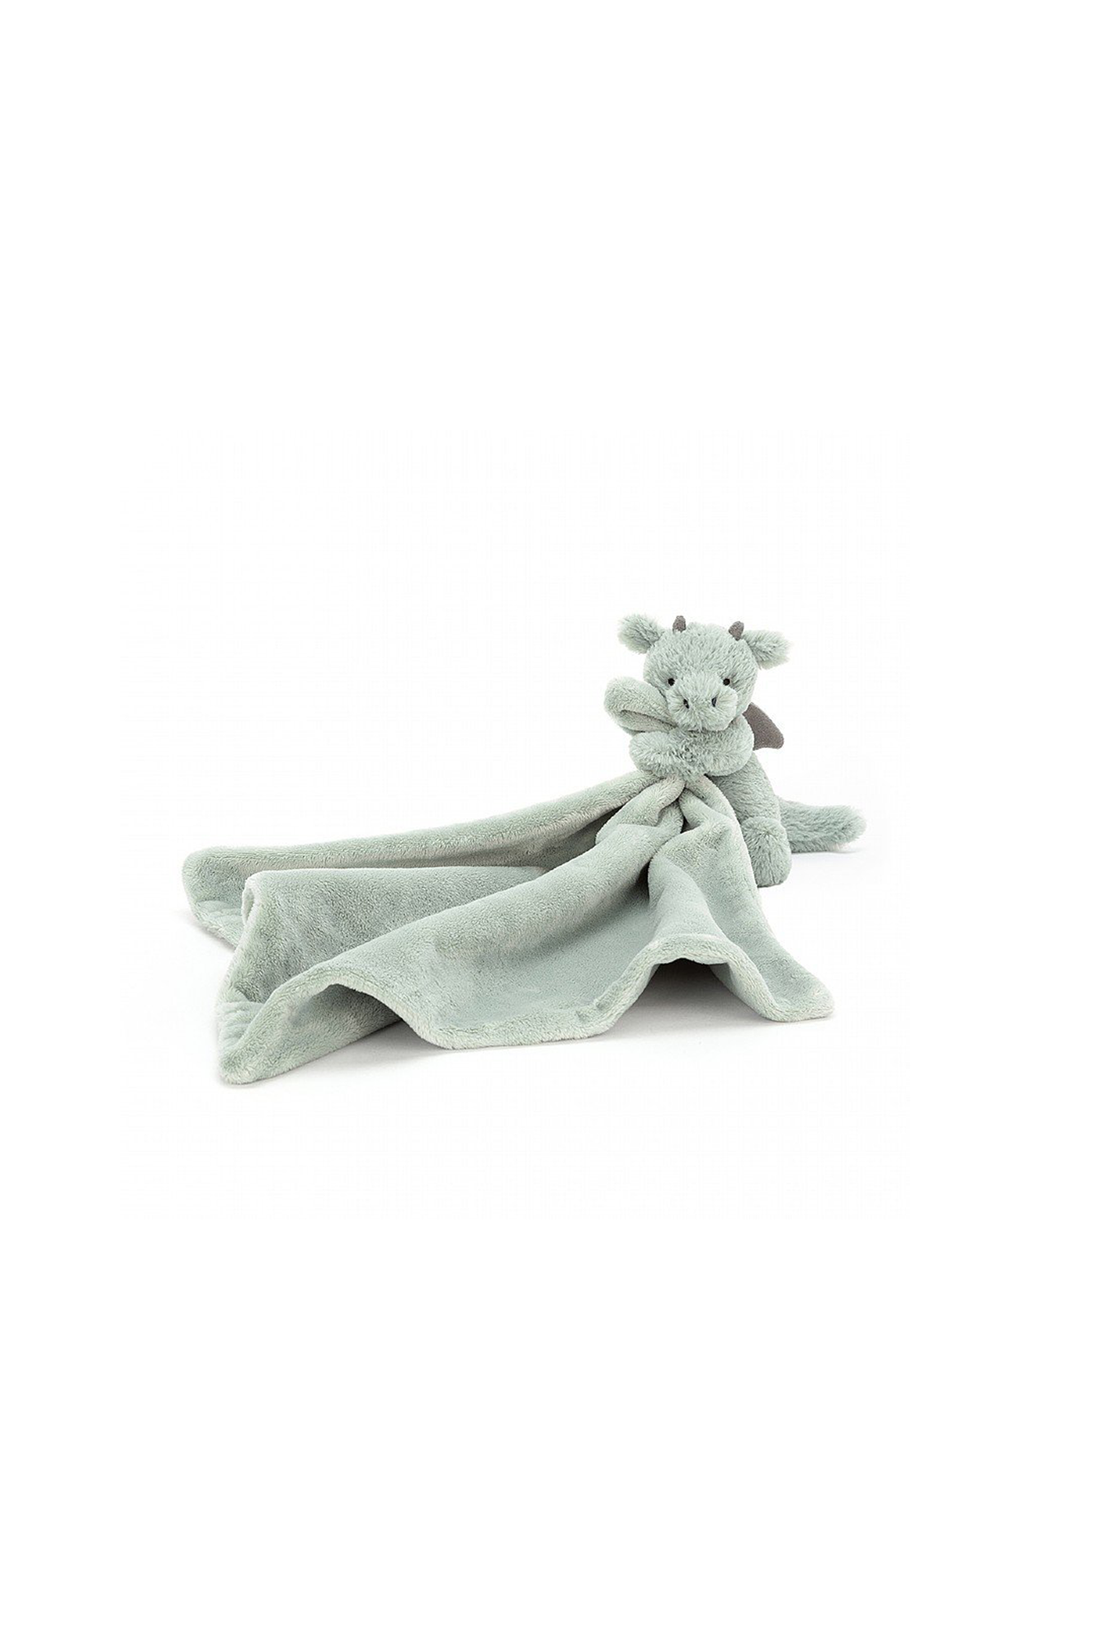 Personalisable Jellycat Bashful Dragon Soother - Sea Apple